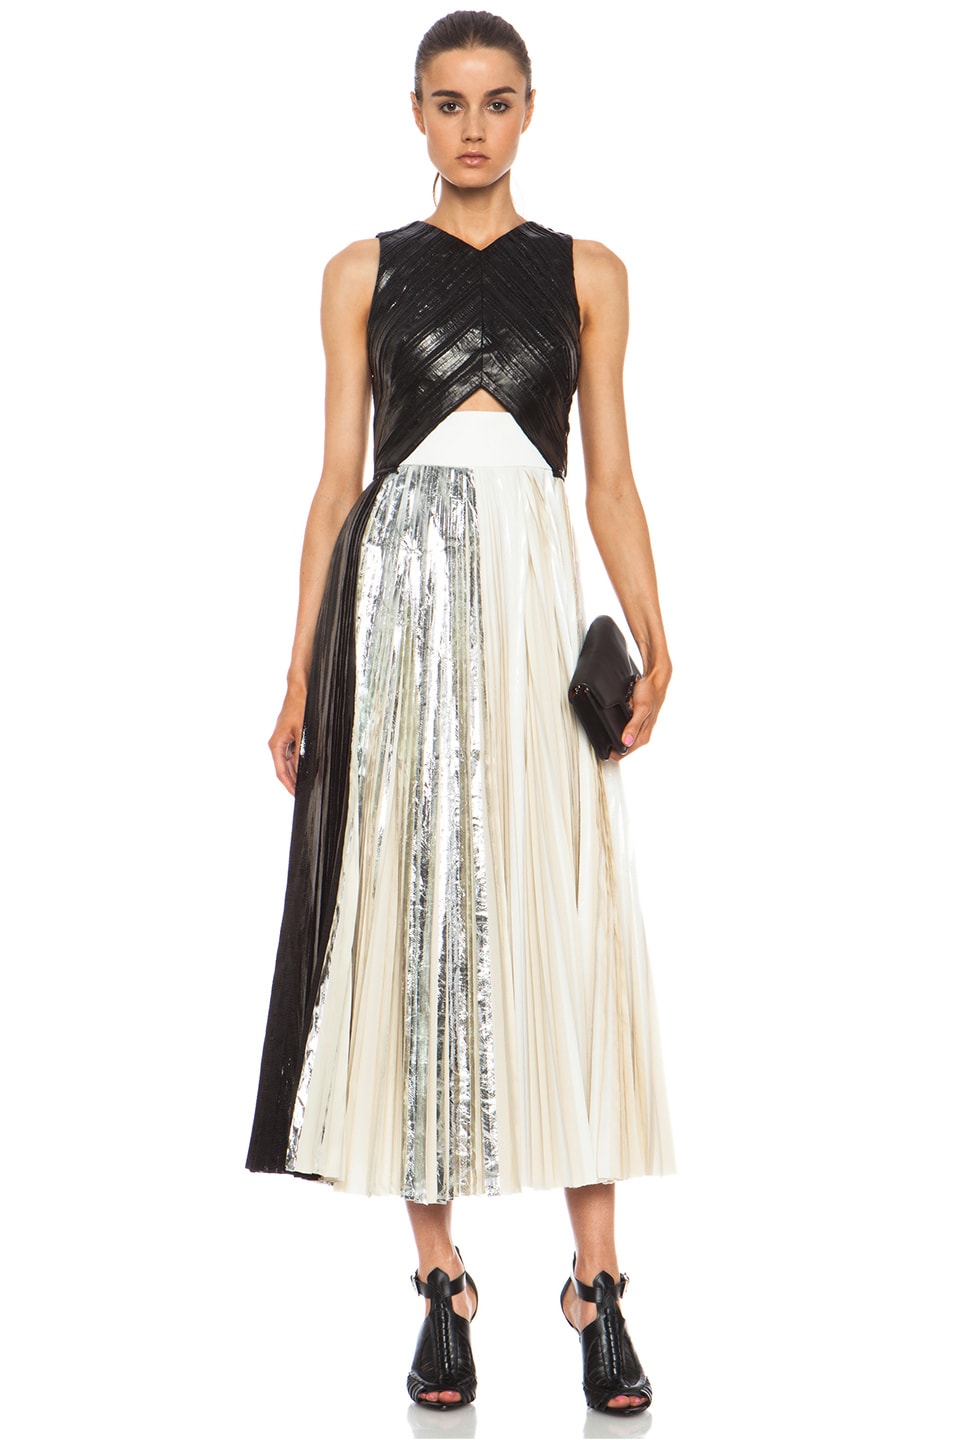 Proenza Schouler Foil Print Poly Pleated Dress in Black, Silver & White ...